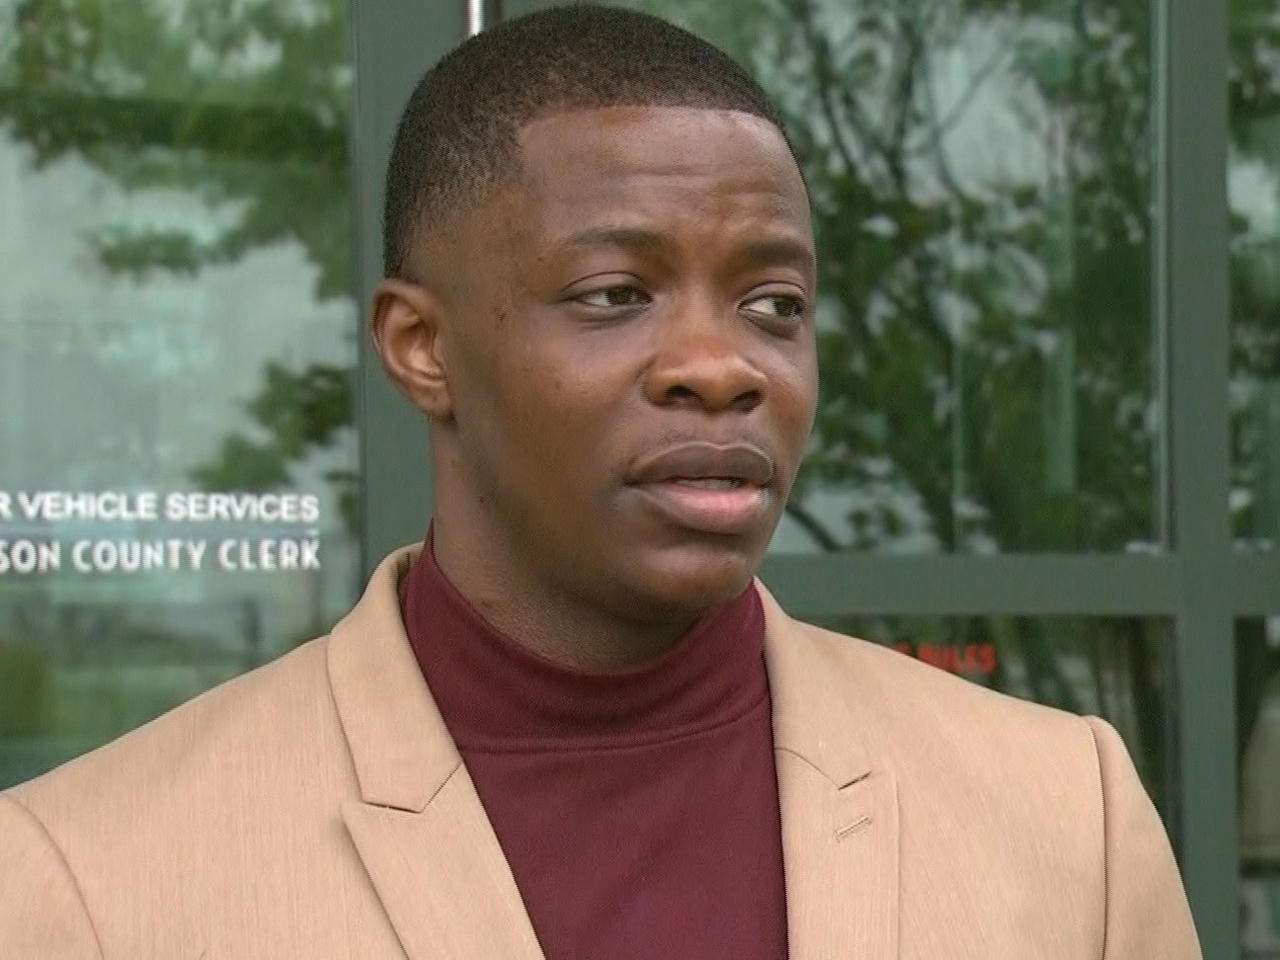 Man who wrestled gun from Waffle House shooter raises $150,000 for